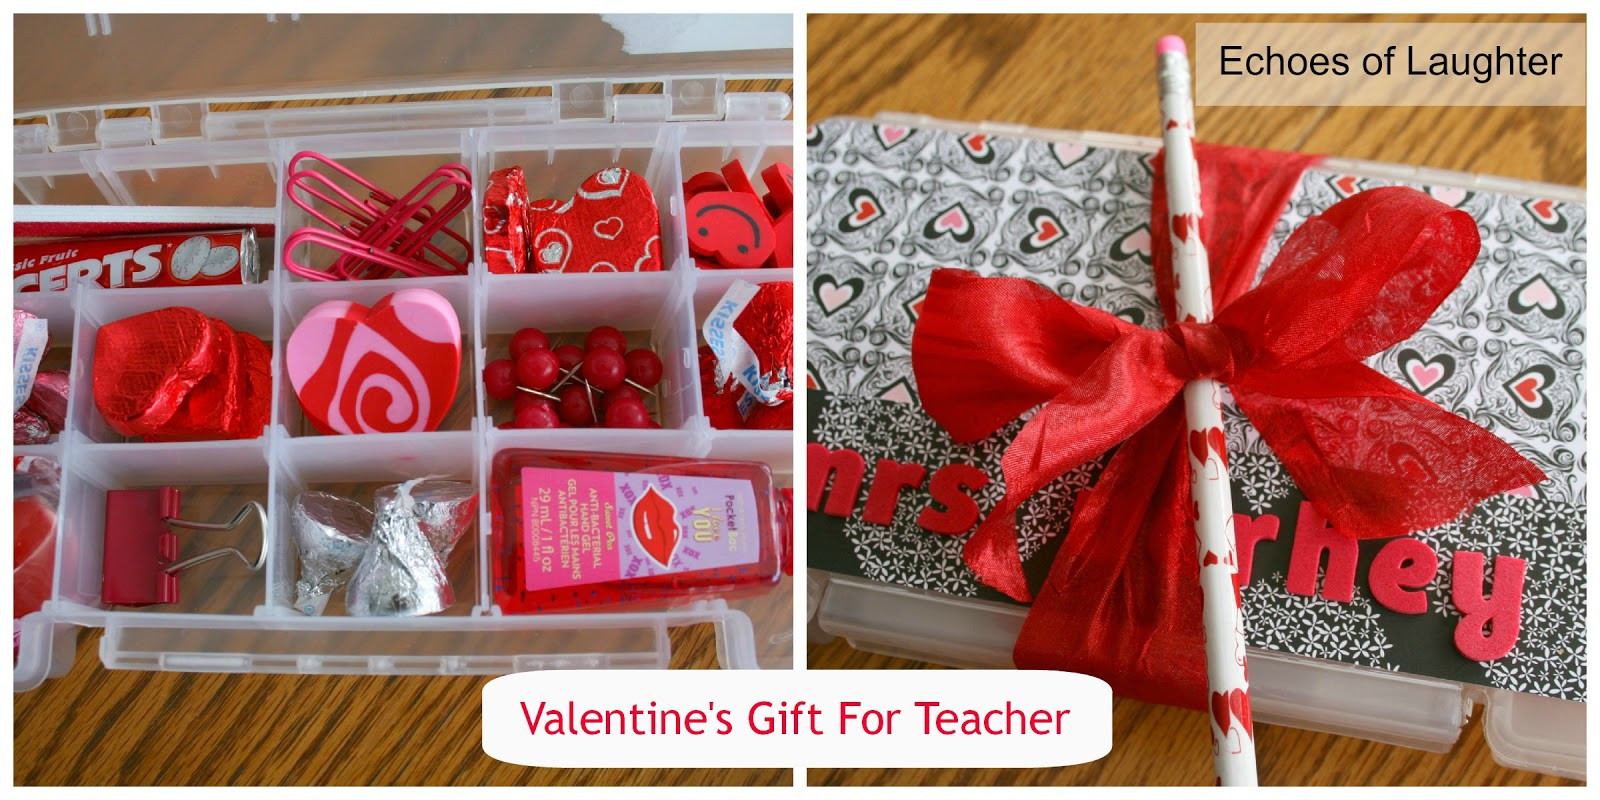 Valentine'S Day Gift Ideas For Teachers
 10 Inspiring Valentine s Ideas Echoes of Laughter